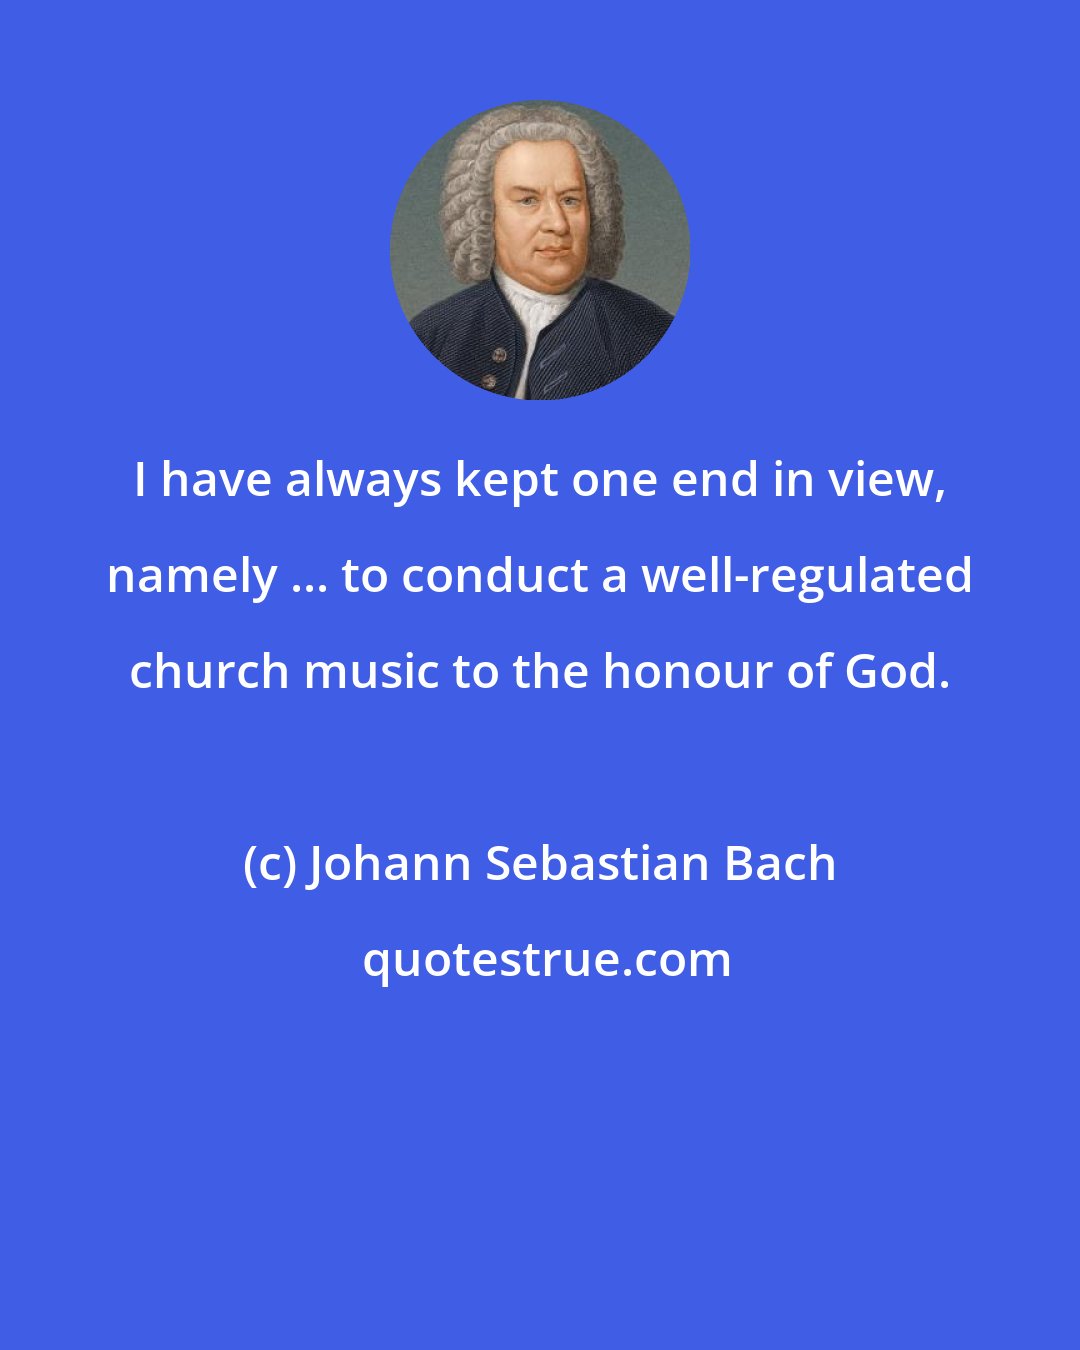 Johann Sebastian Bach: I have always kept one end in view, namely ... to conduct a well-regulated church music to the honour of God.